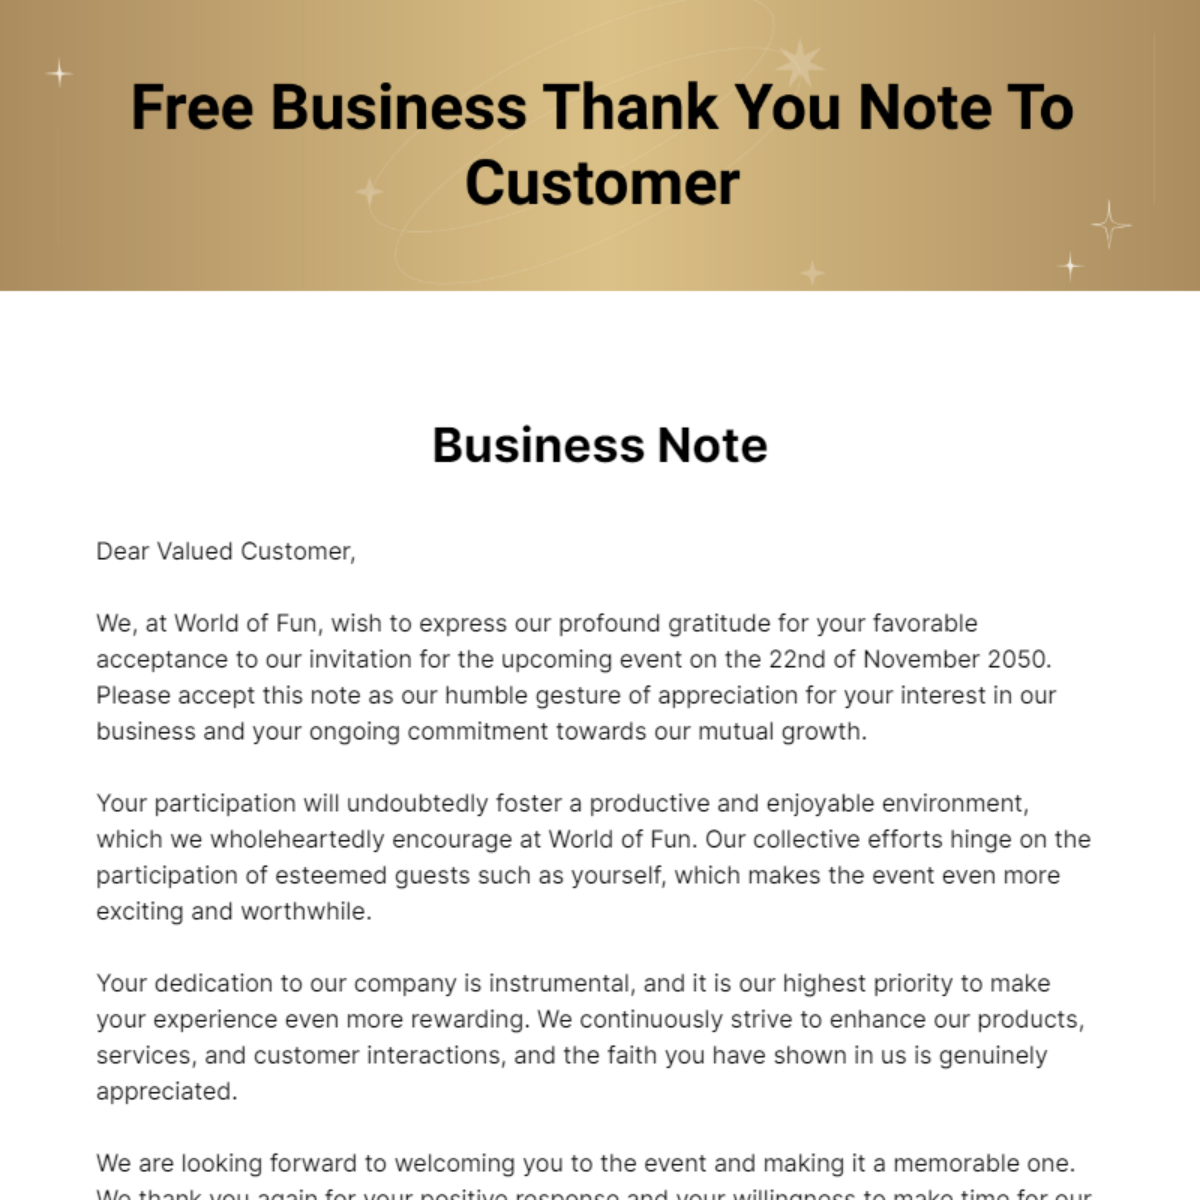 Free Business Thank you Note to Customer Template